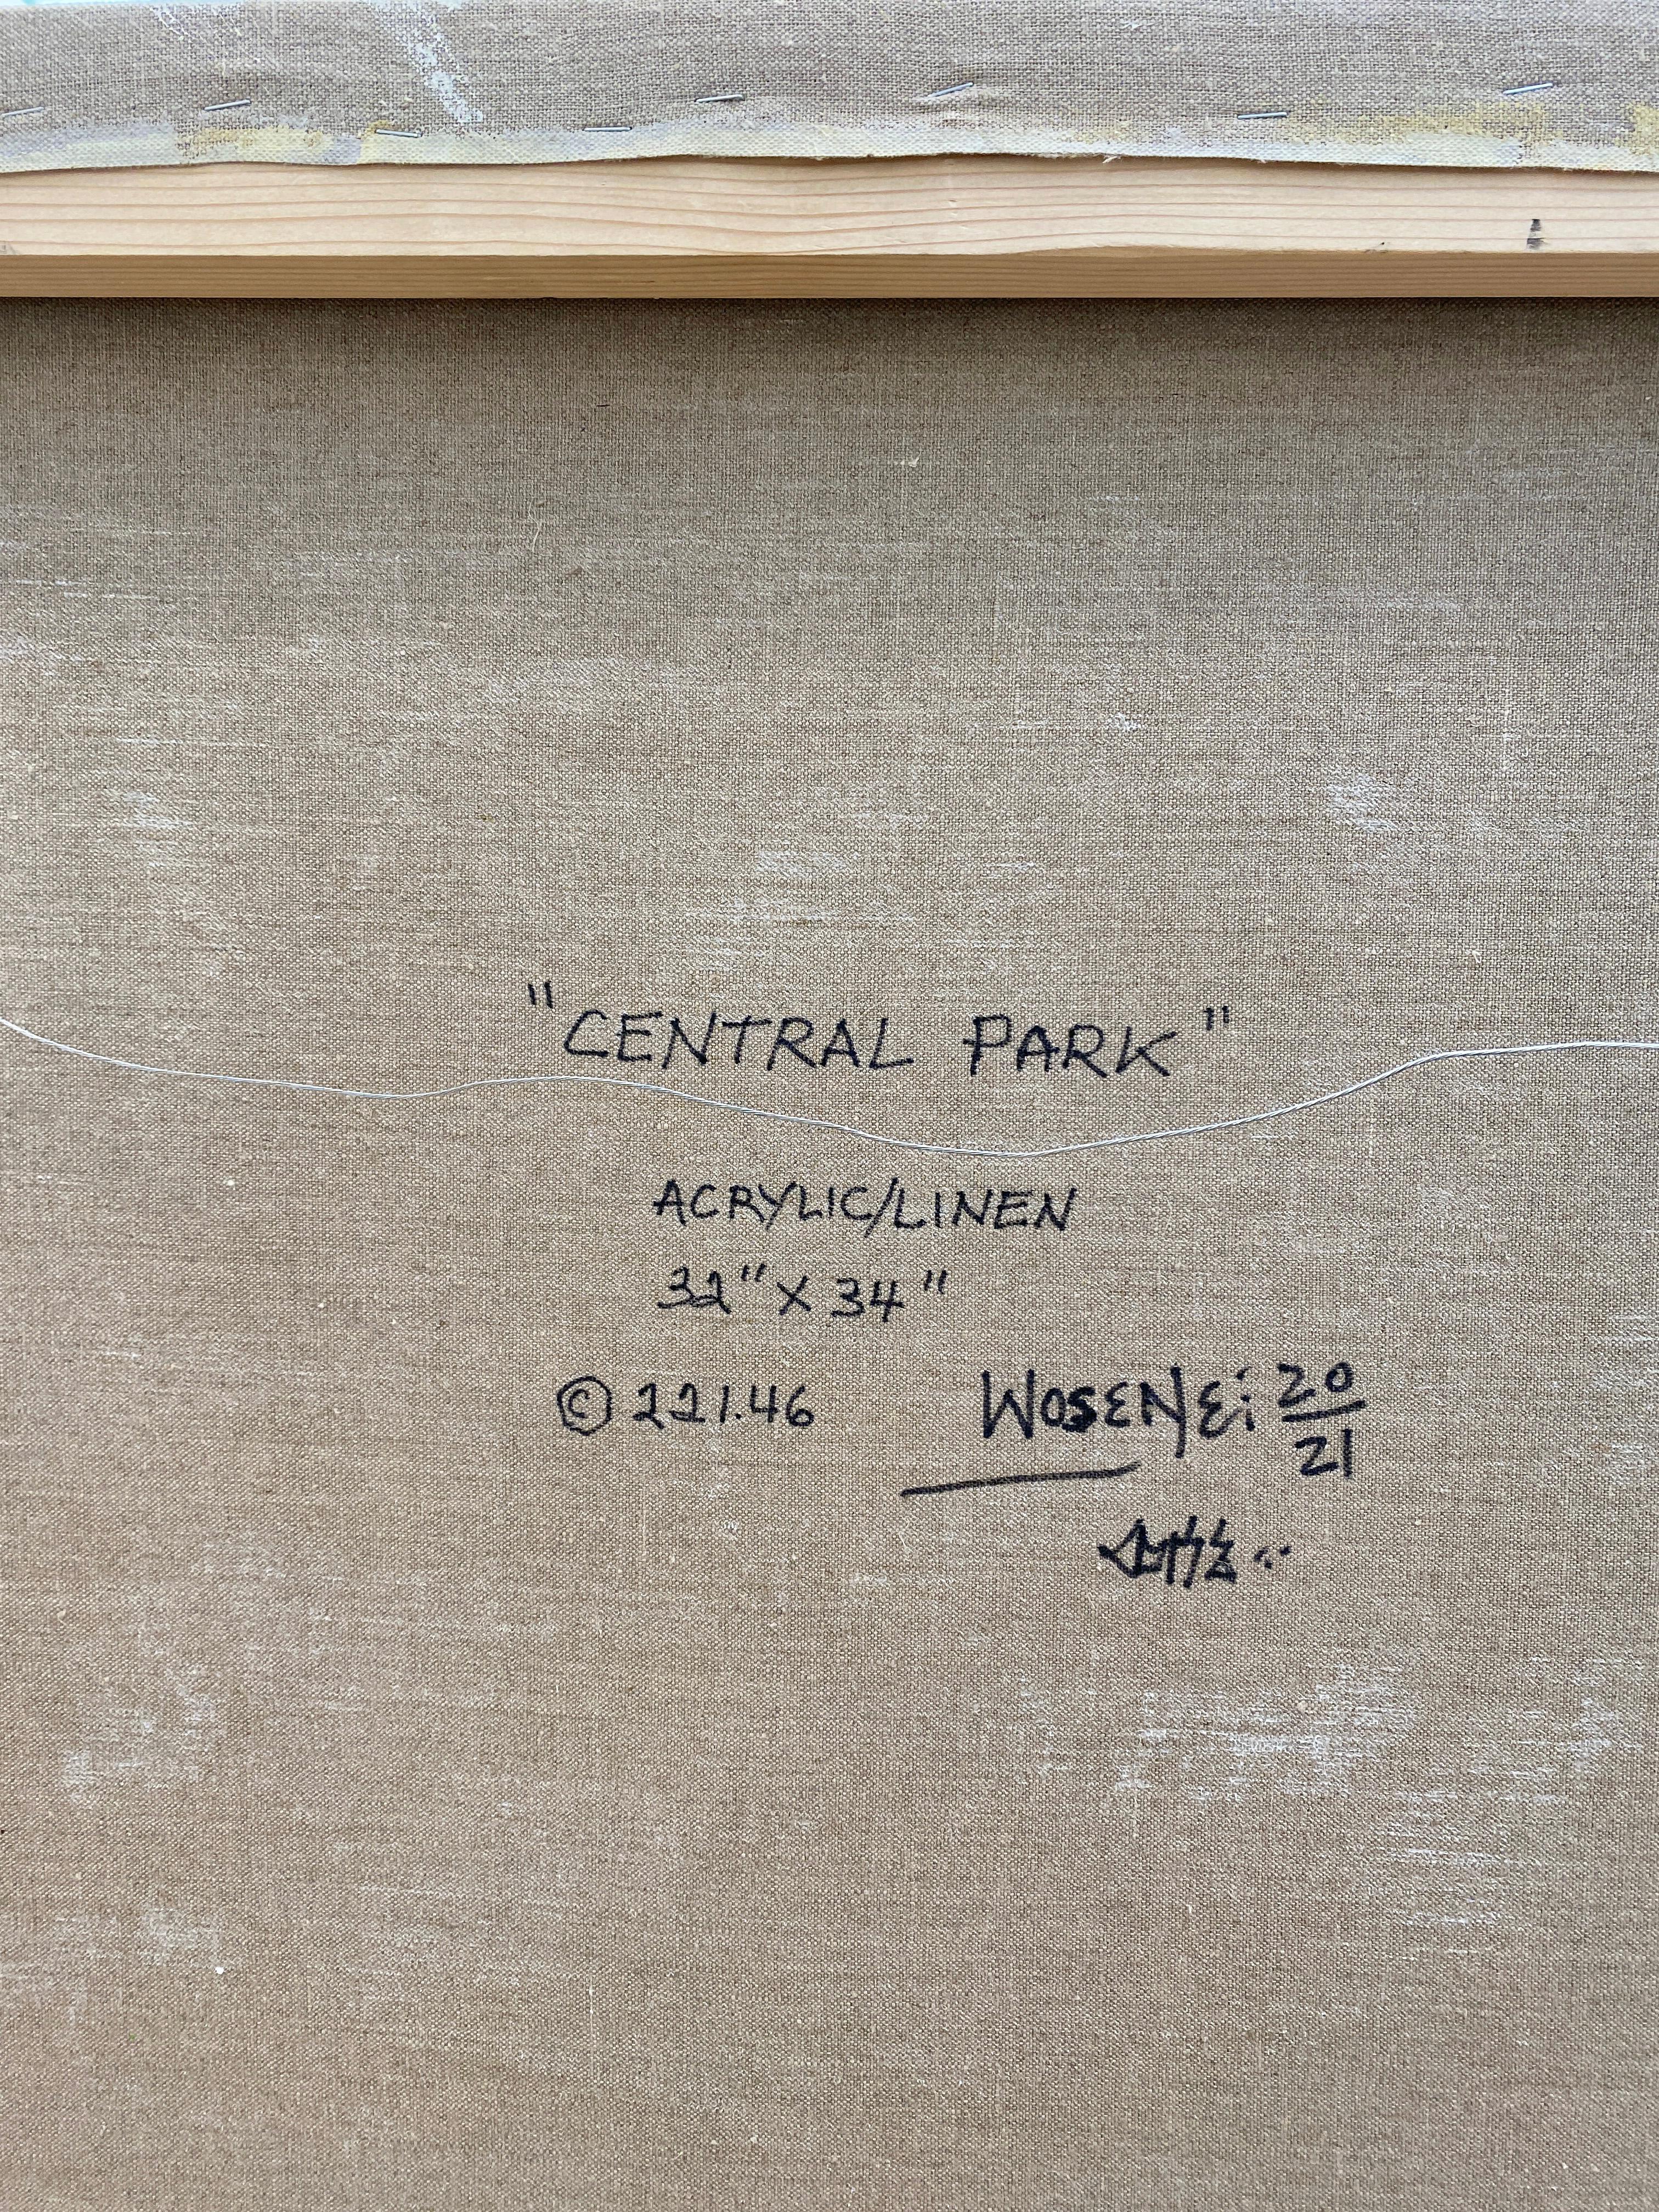 Wosene Kosrof Abstract Painting 'Central Park' For Sale 4